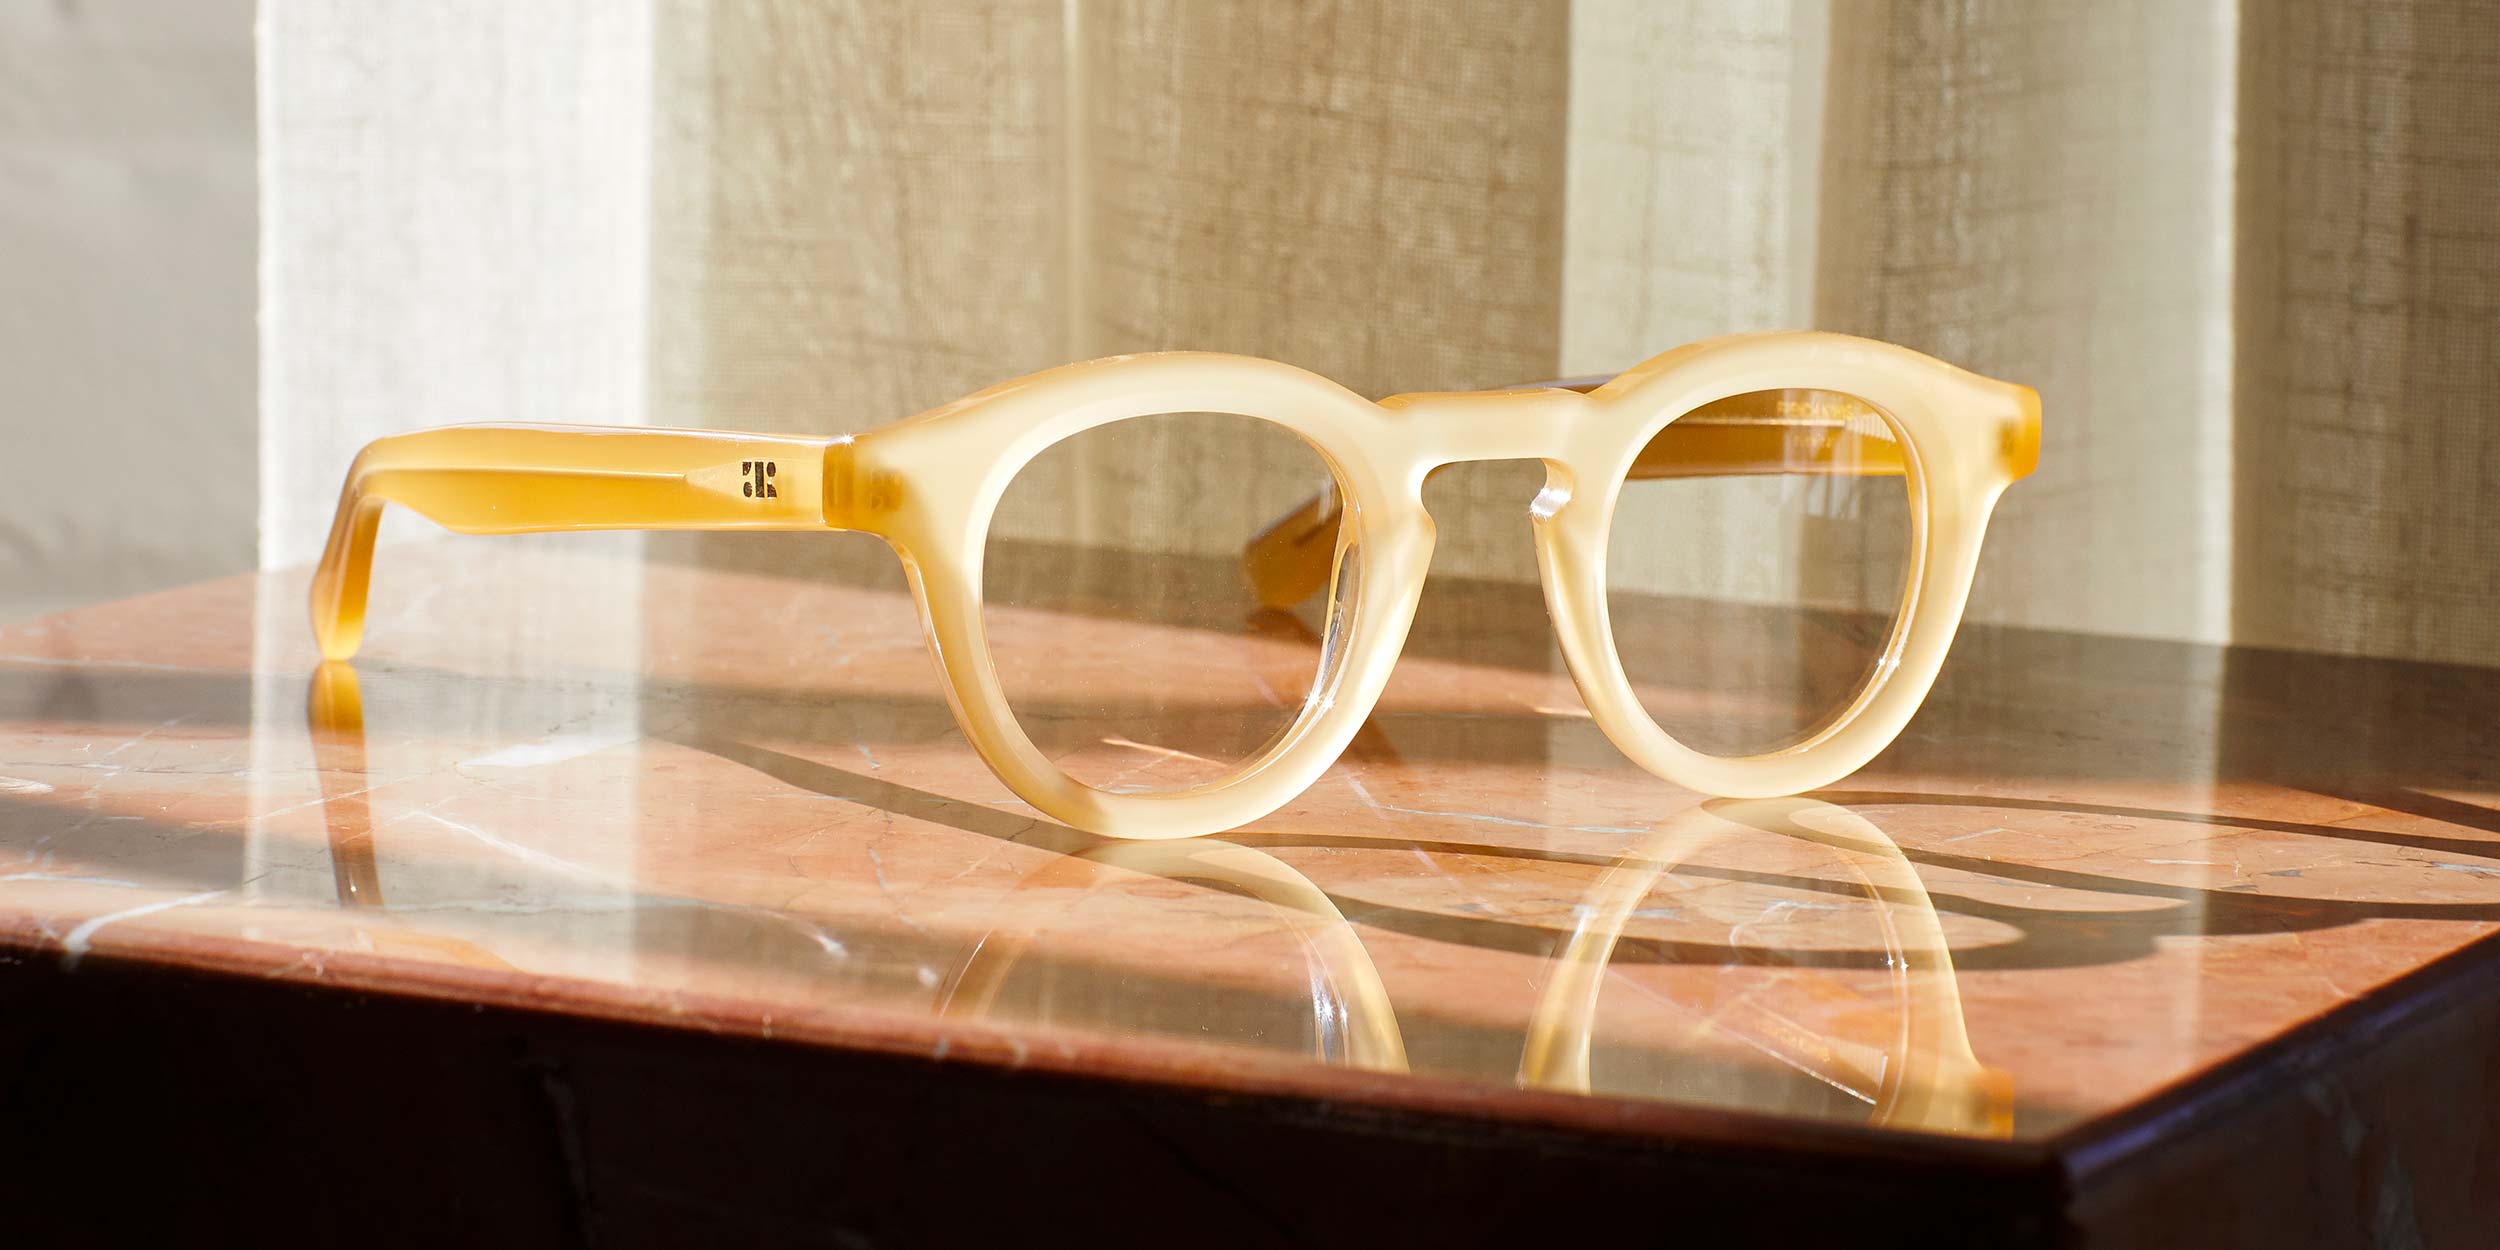 Photo Details of Jude Grey Tortoise Reading Glasses in a room